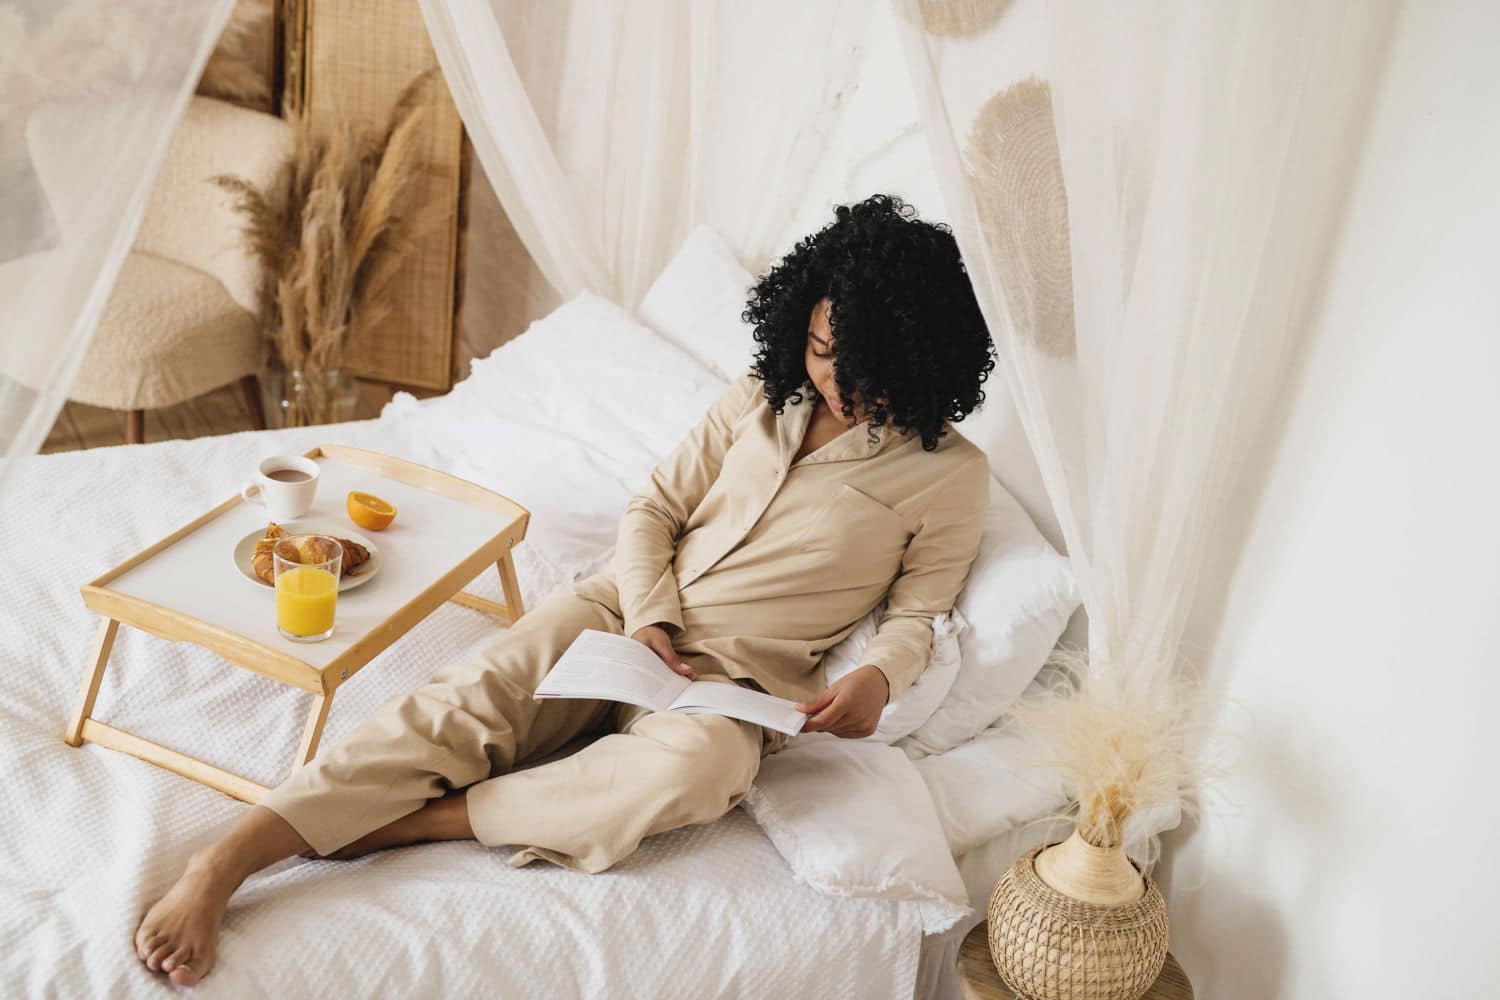 A woman lying on bed, reading a book with a breakfast tray next to her